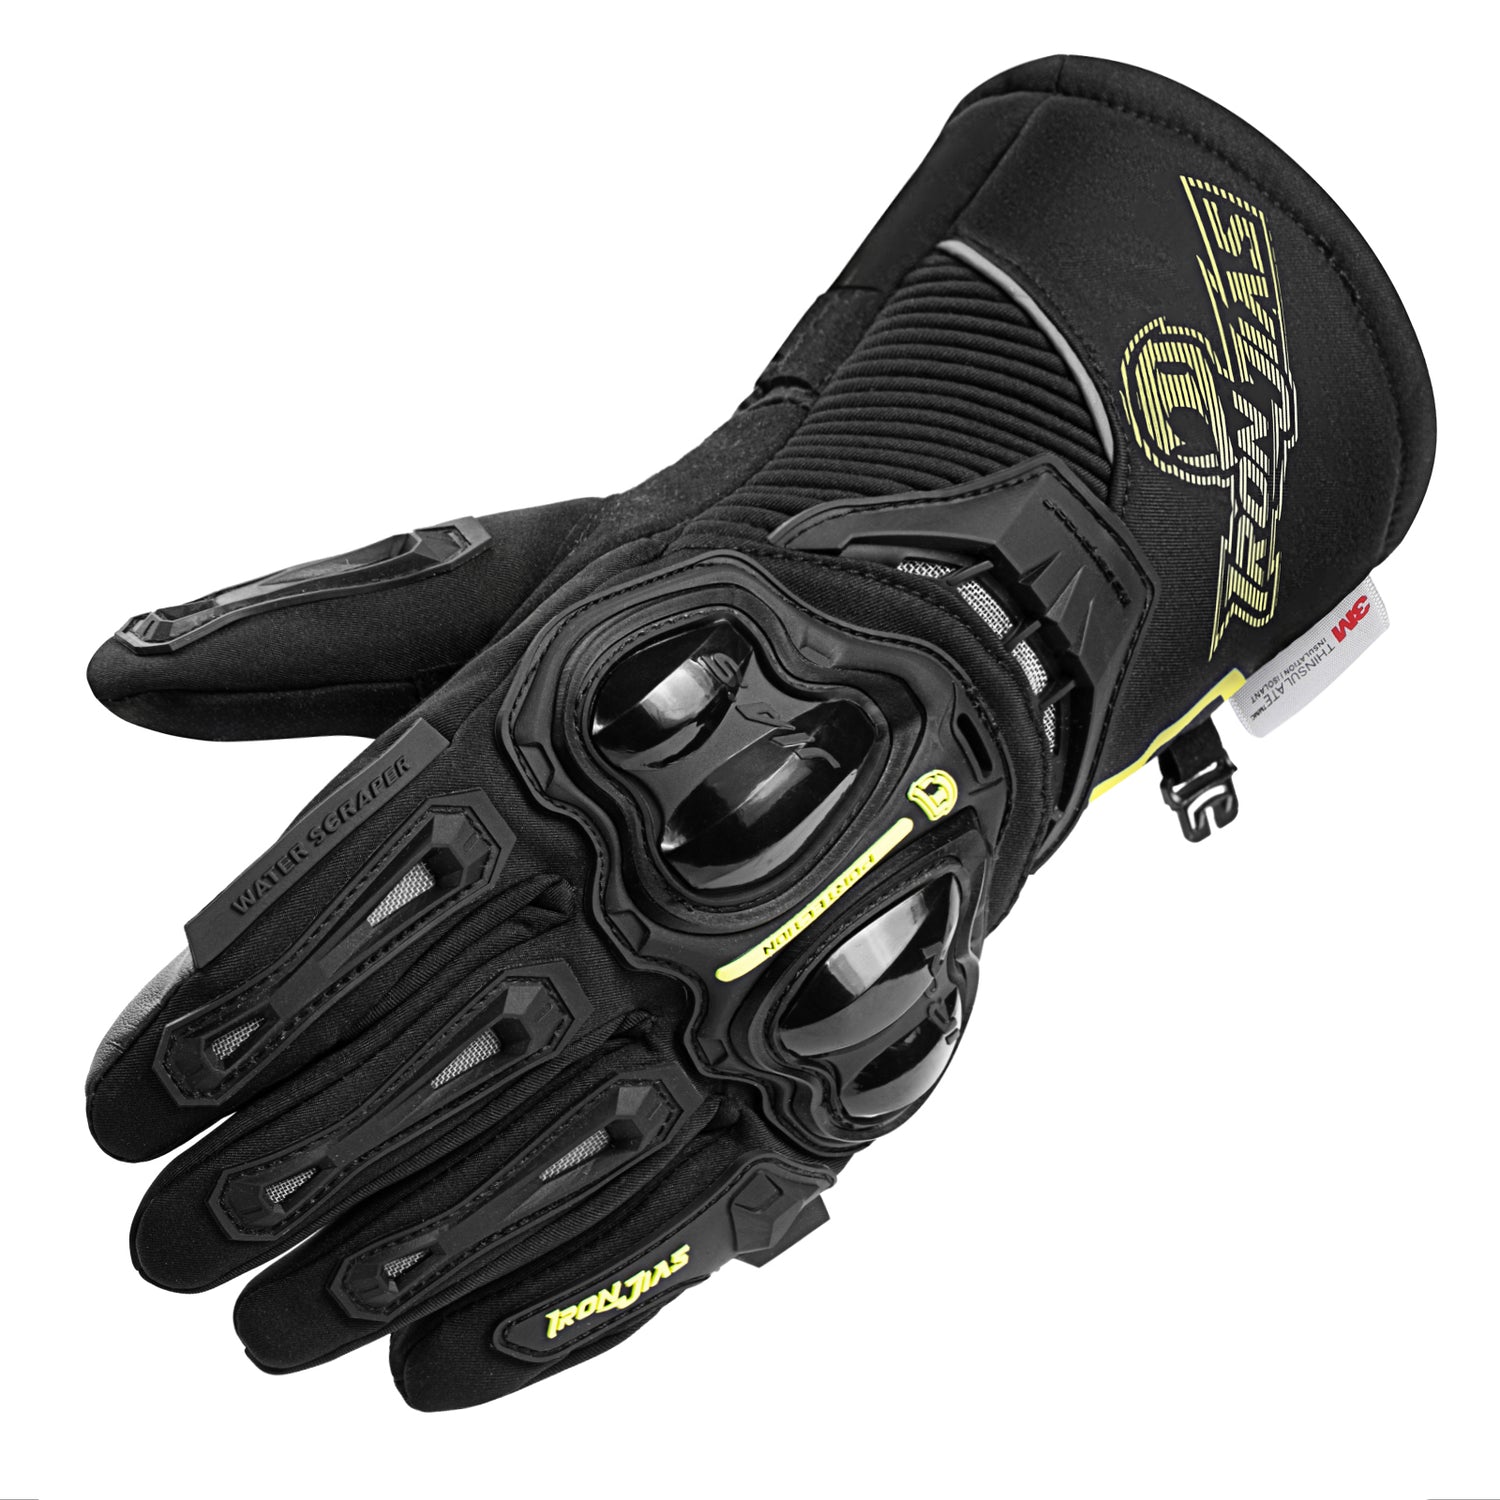  IRON JIA'S Motorcycle Gloves Winter Cold Weather Warm  Touchscreen Waterproof Windproof Protective Gear (Black, XL) : Automotive